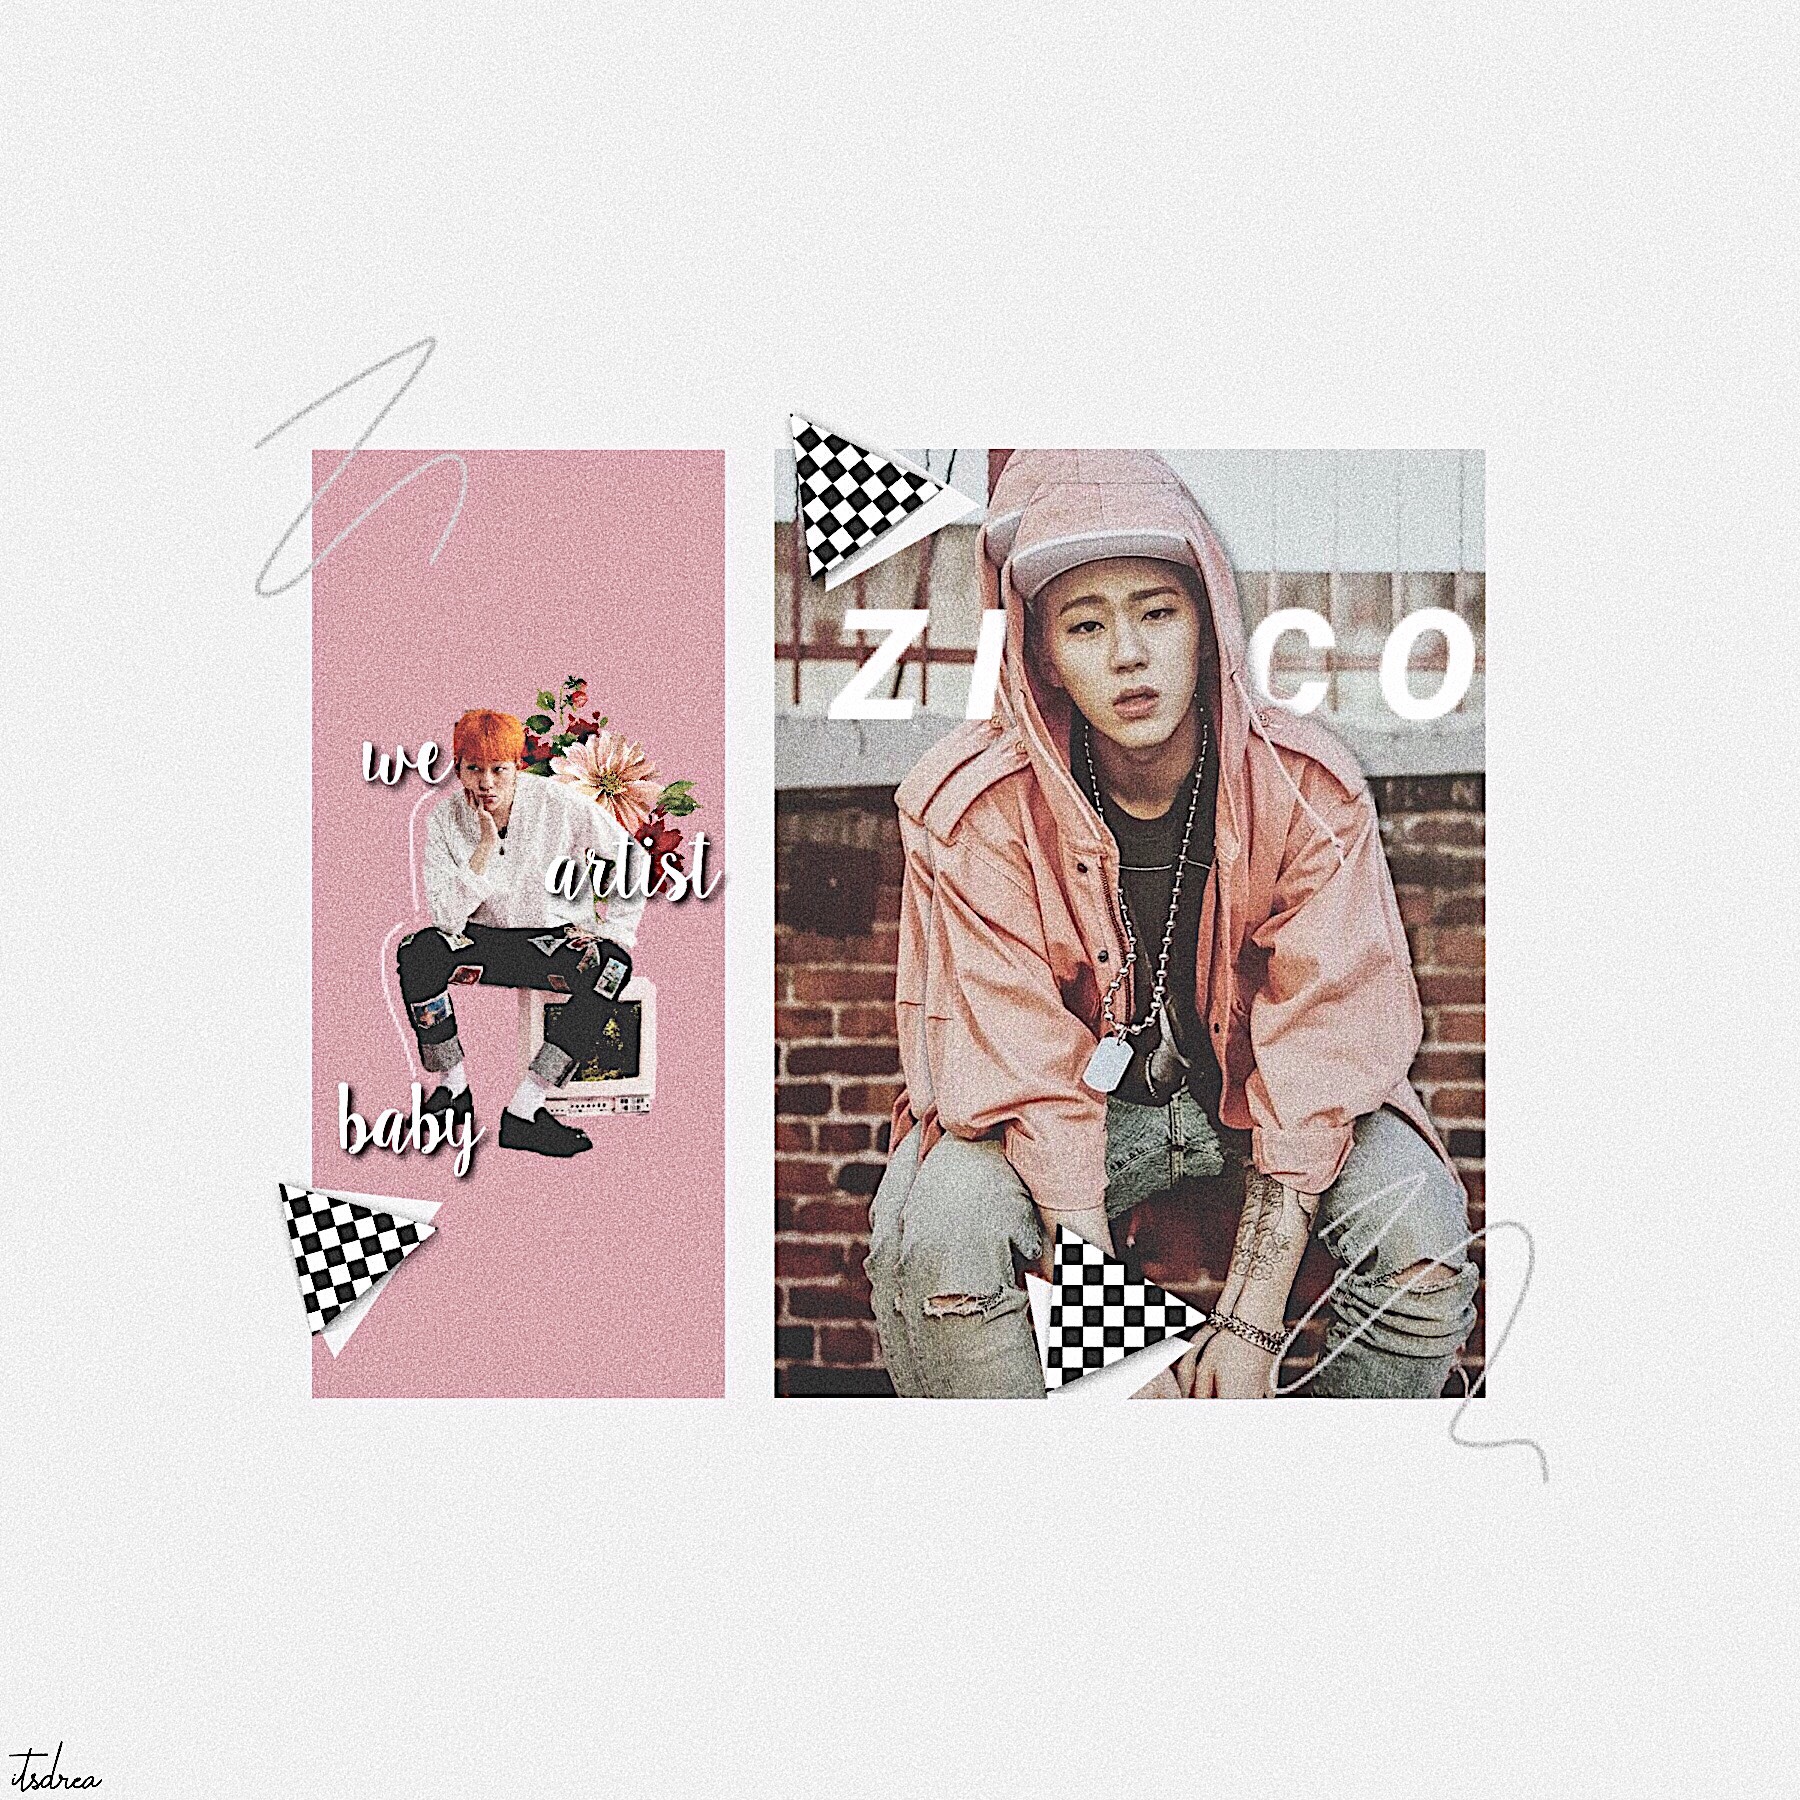 ♡
song rec: bermuda triangle by zico (ft dean & crush)
i've been getting into him and more krap/khiphop artists. ugh this looks so bad akdhksja i've been loosing inspiration and idk what to doo ;-; this was slightly inspired by @MaRKsOnYuM 💘 p.s check rem